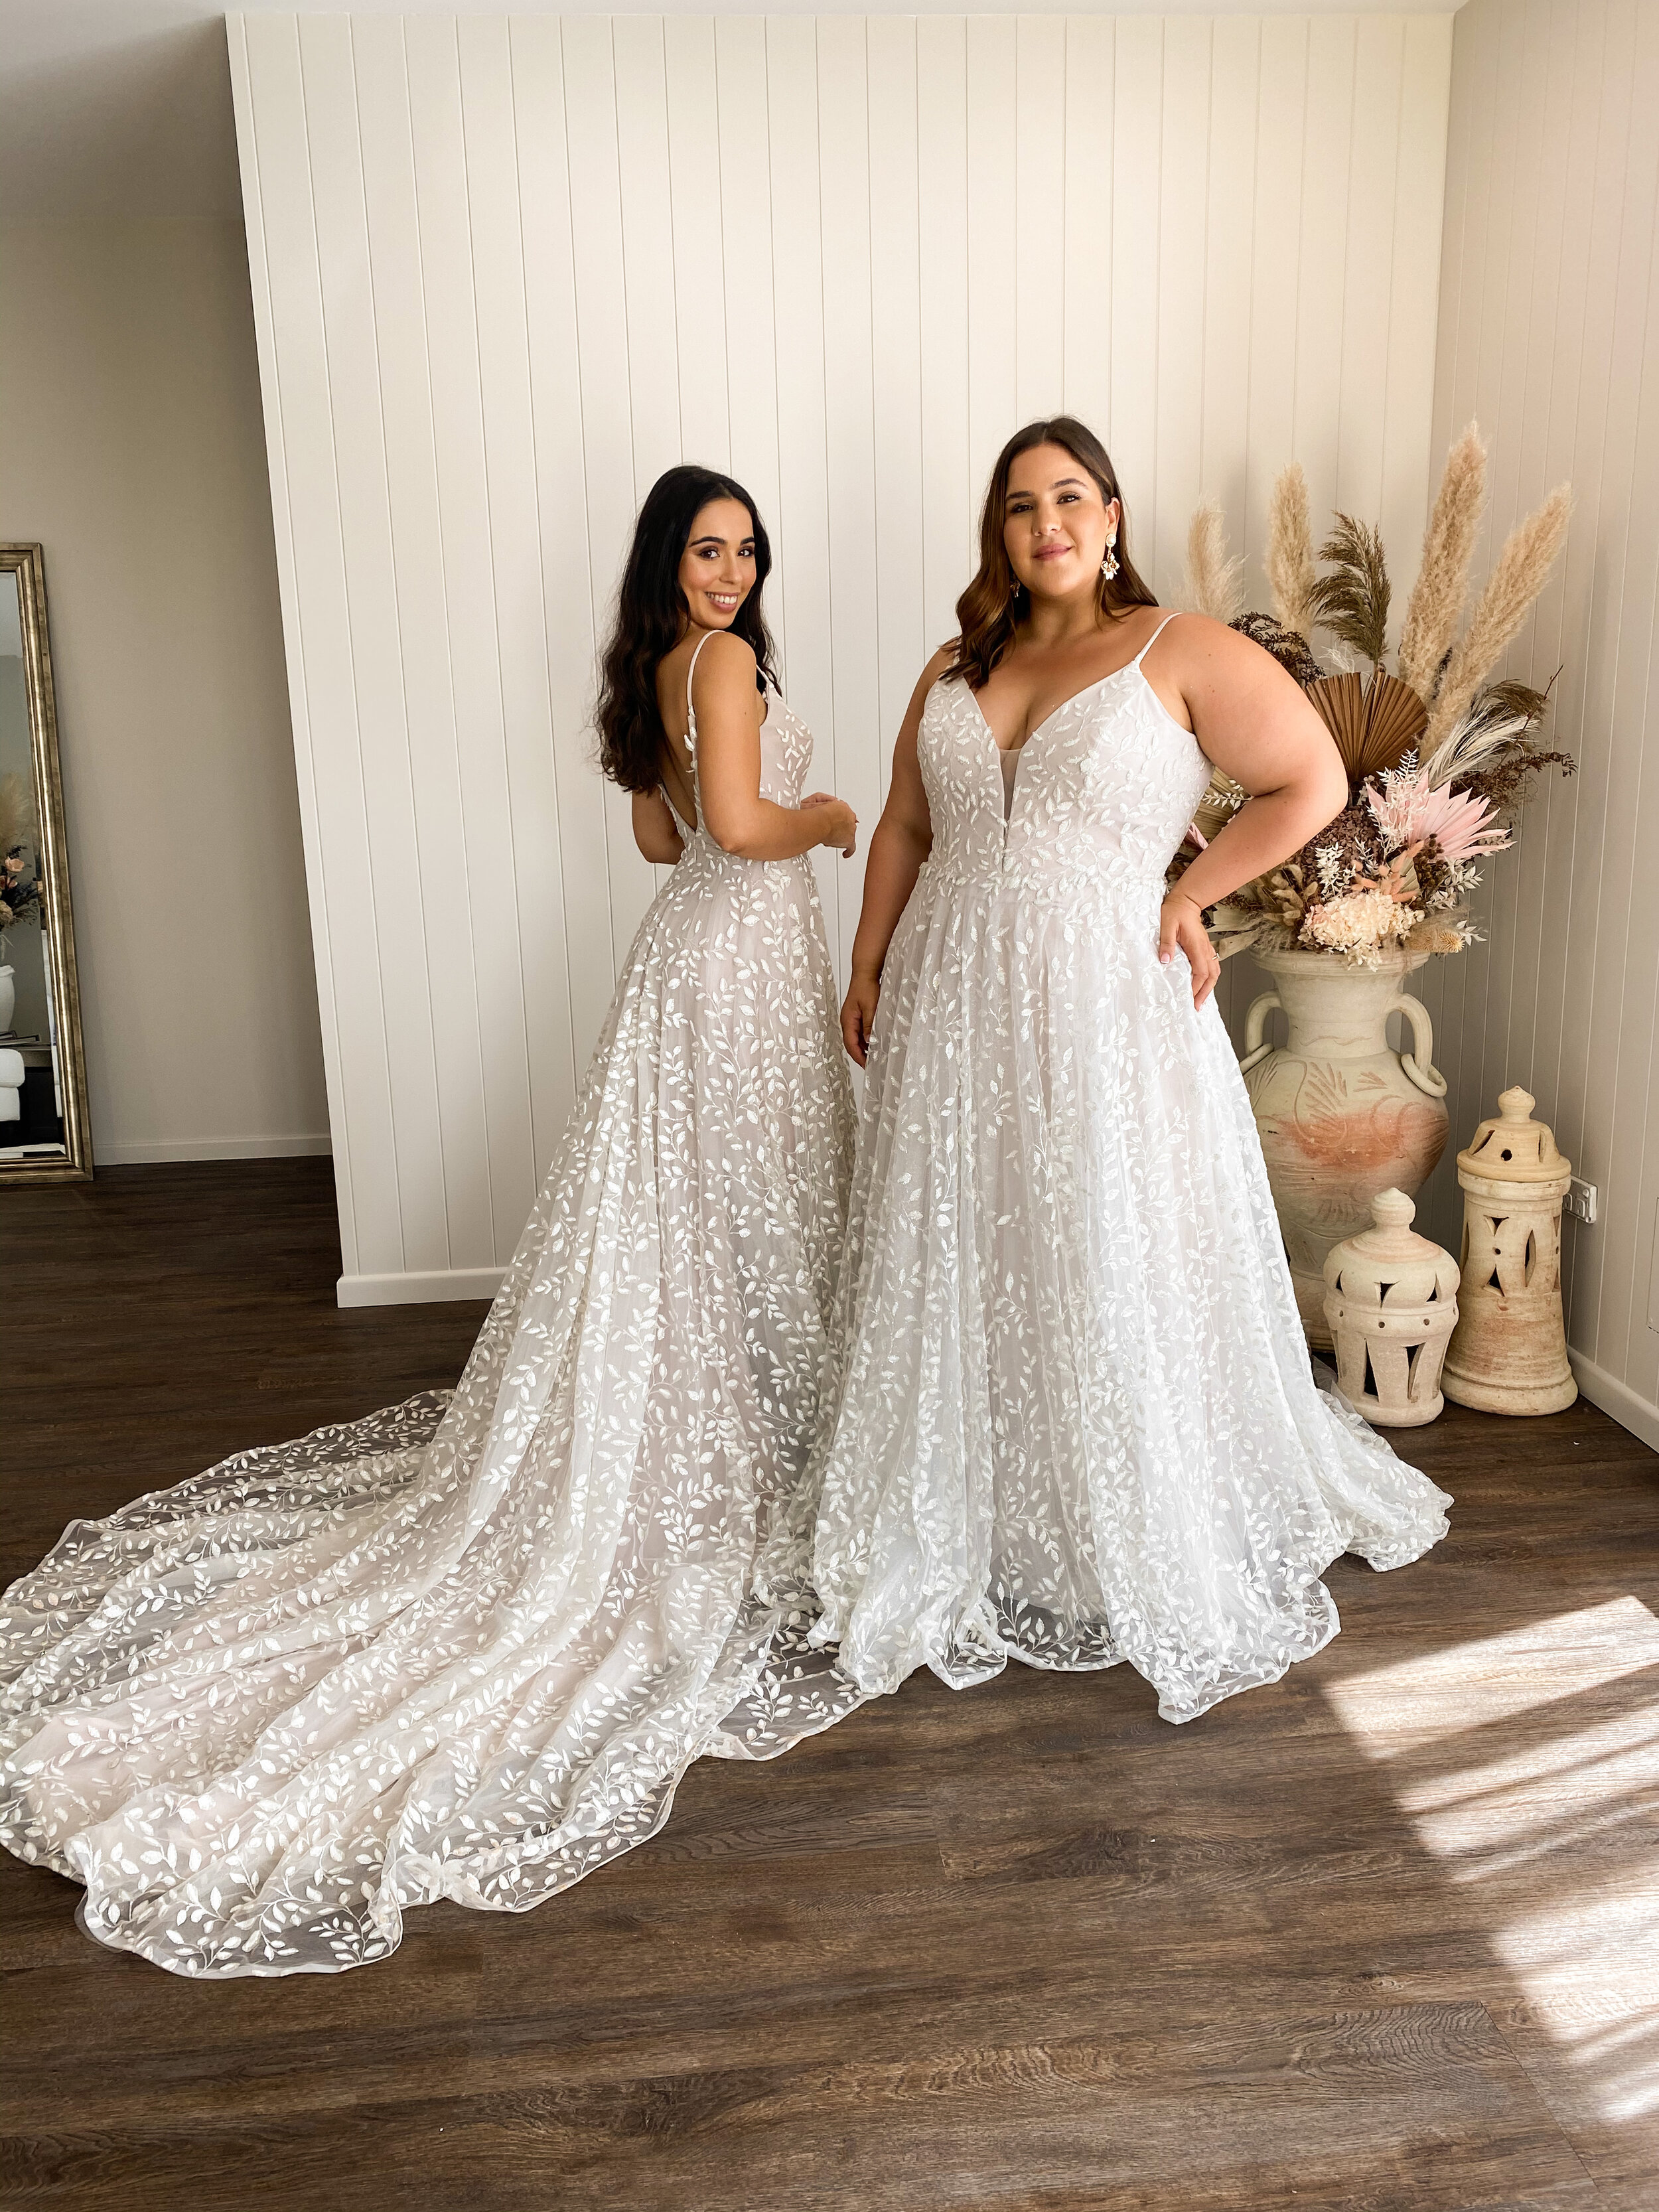 I'm midsize and went wedding dress shopping - it was a total